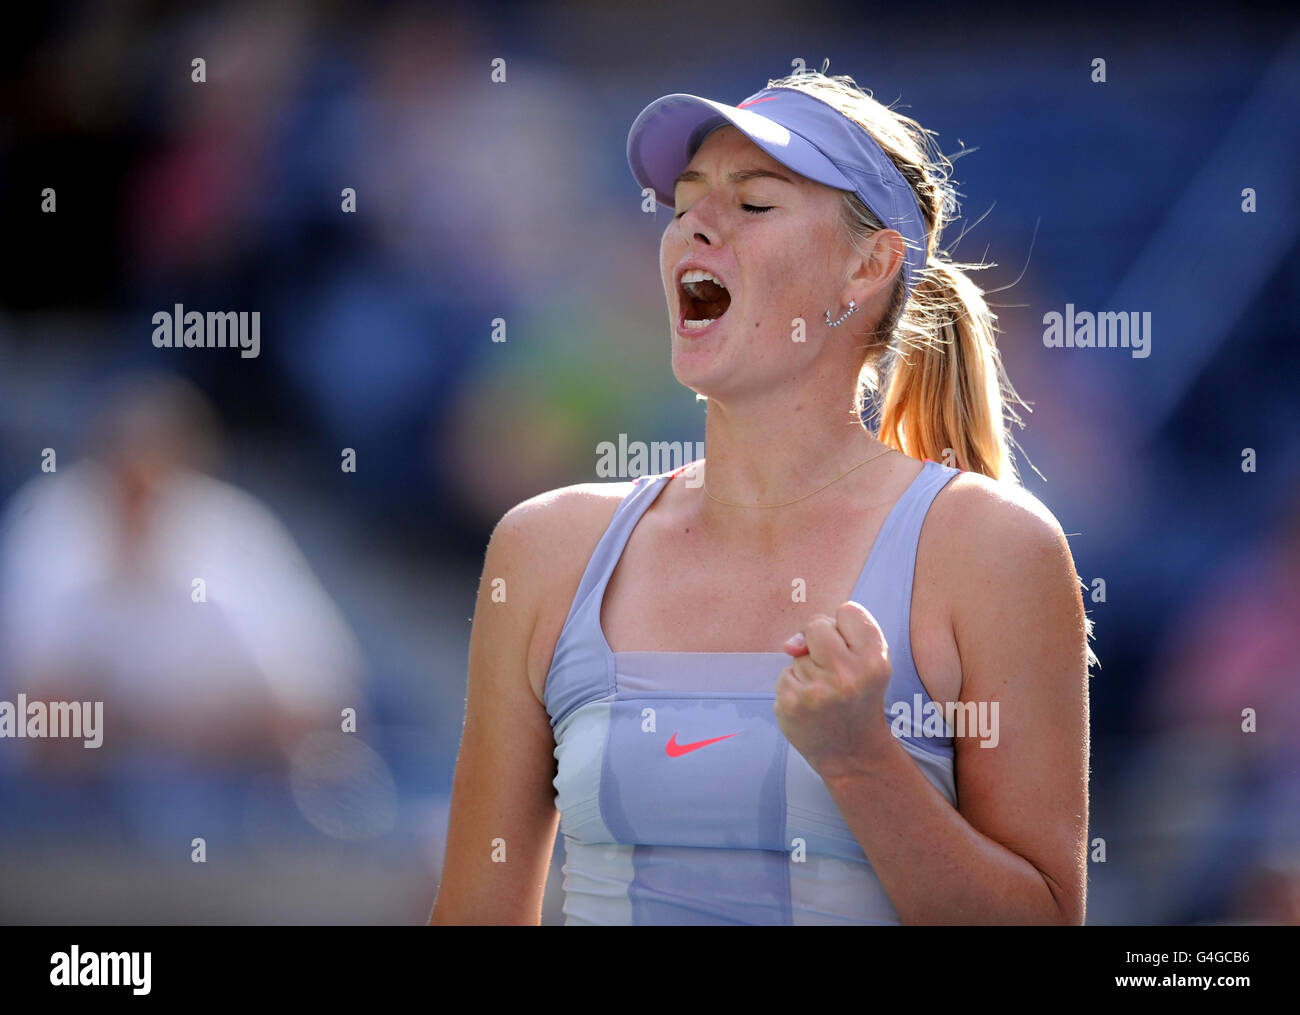 Tennis - 2011 US Open - Day One - Flushing Meadows Foto Stock